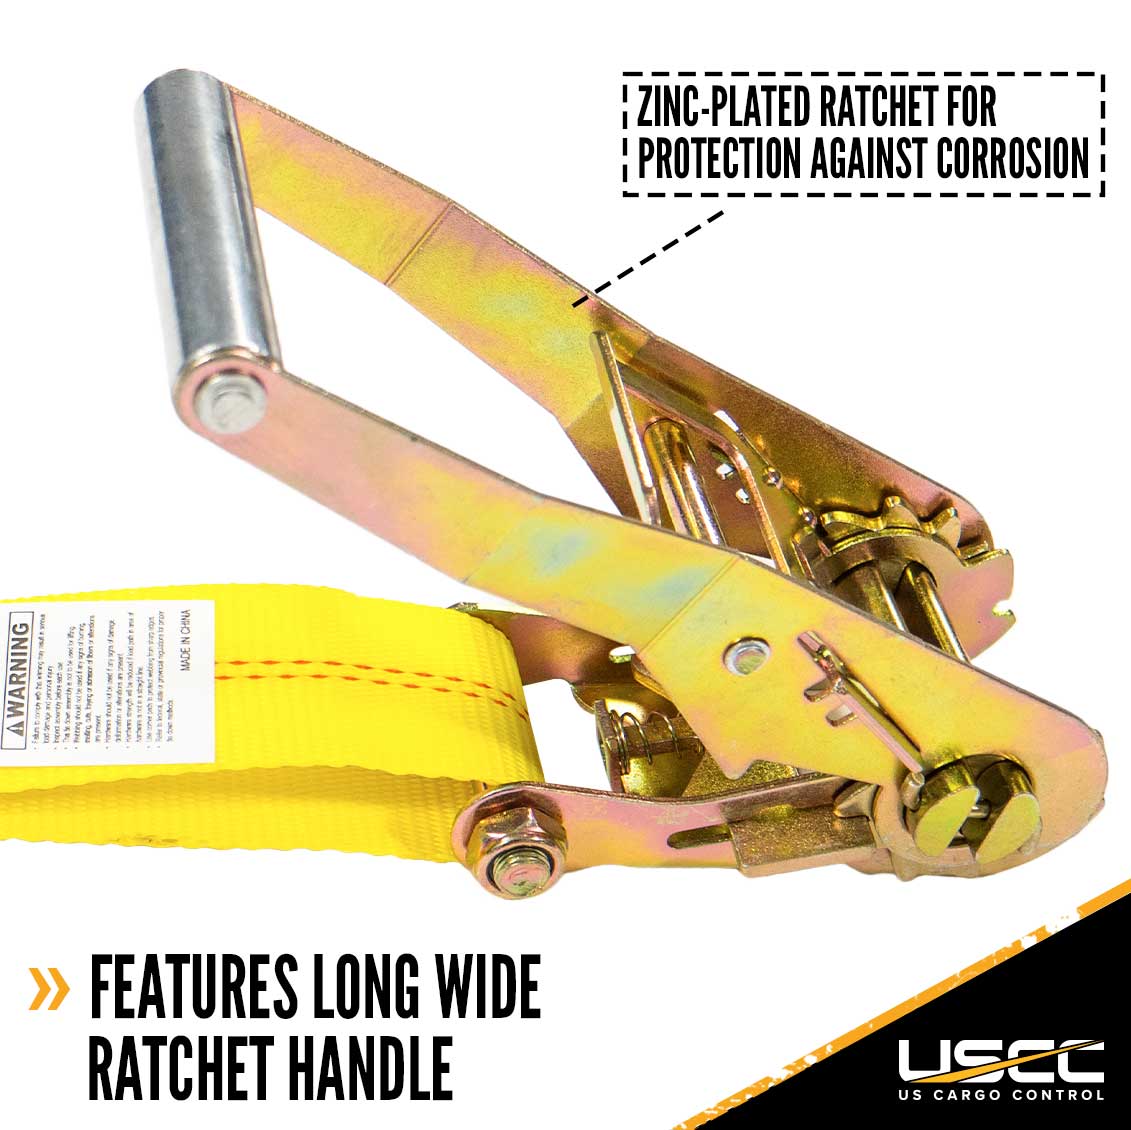 2" x 10' Ratchet Strap with Chain Extension and RTJ Cluster Hook